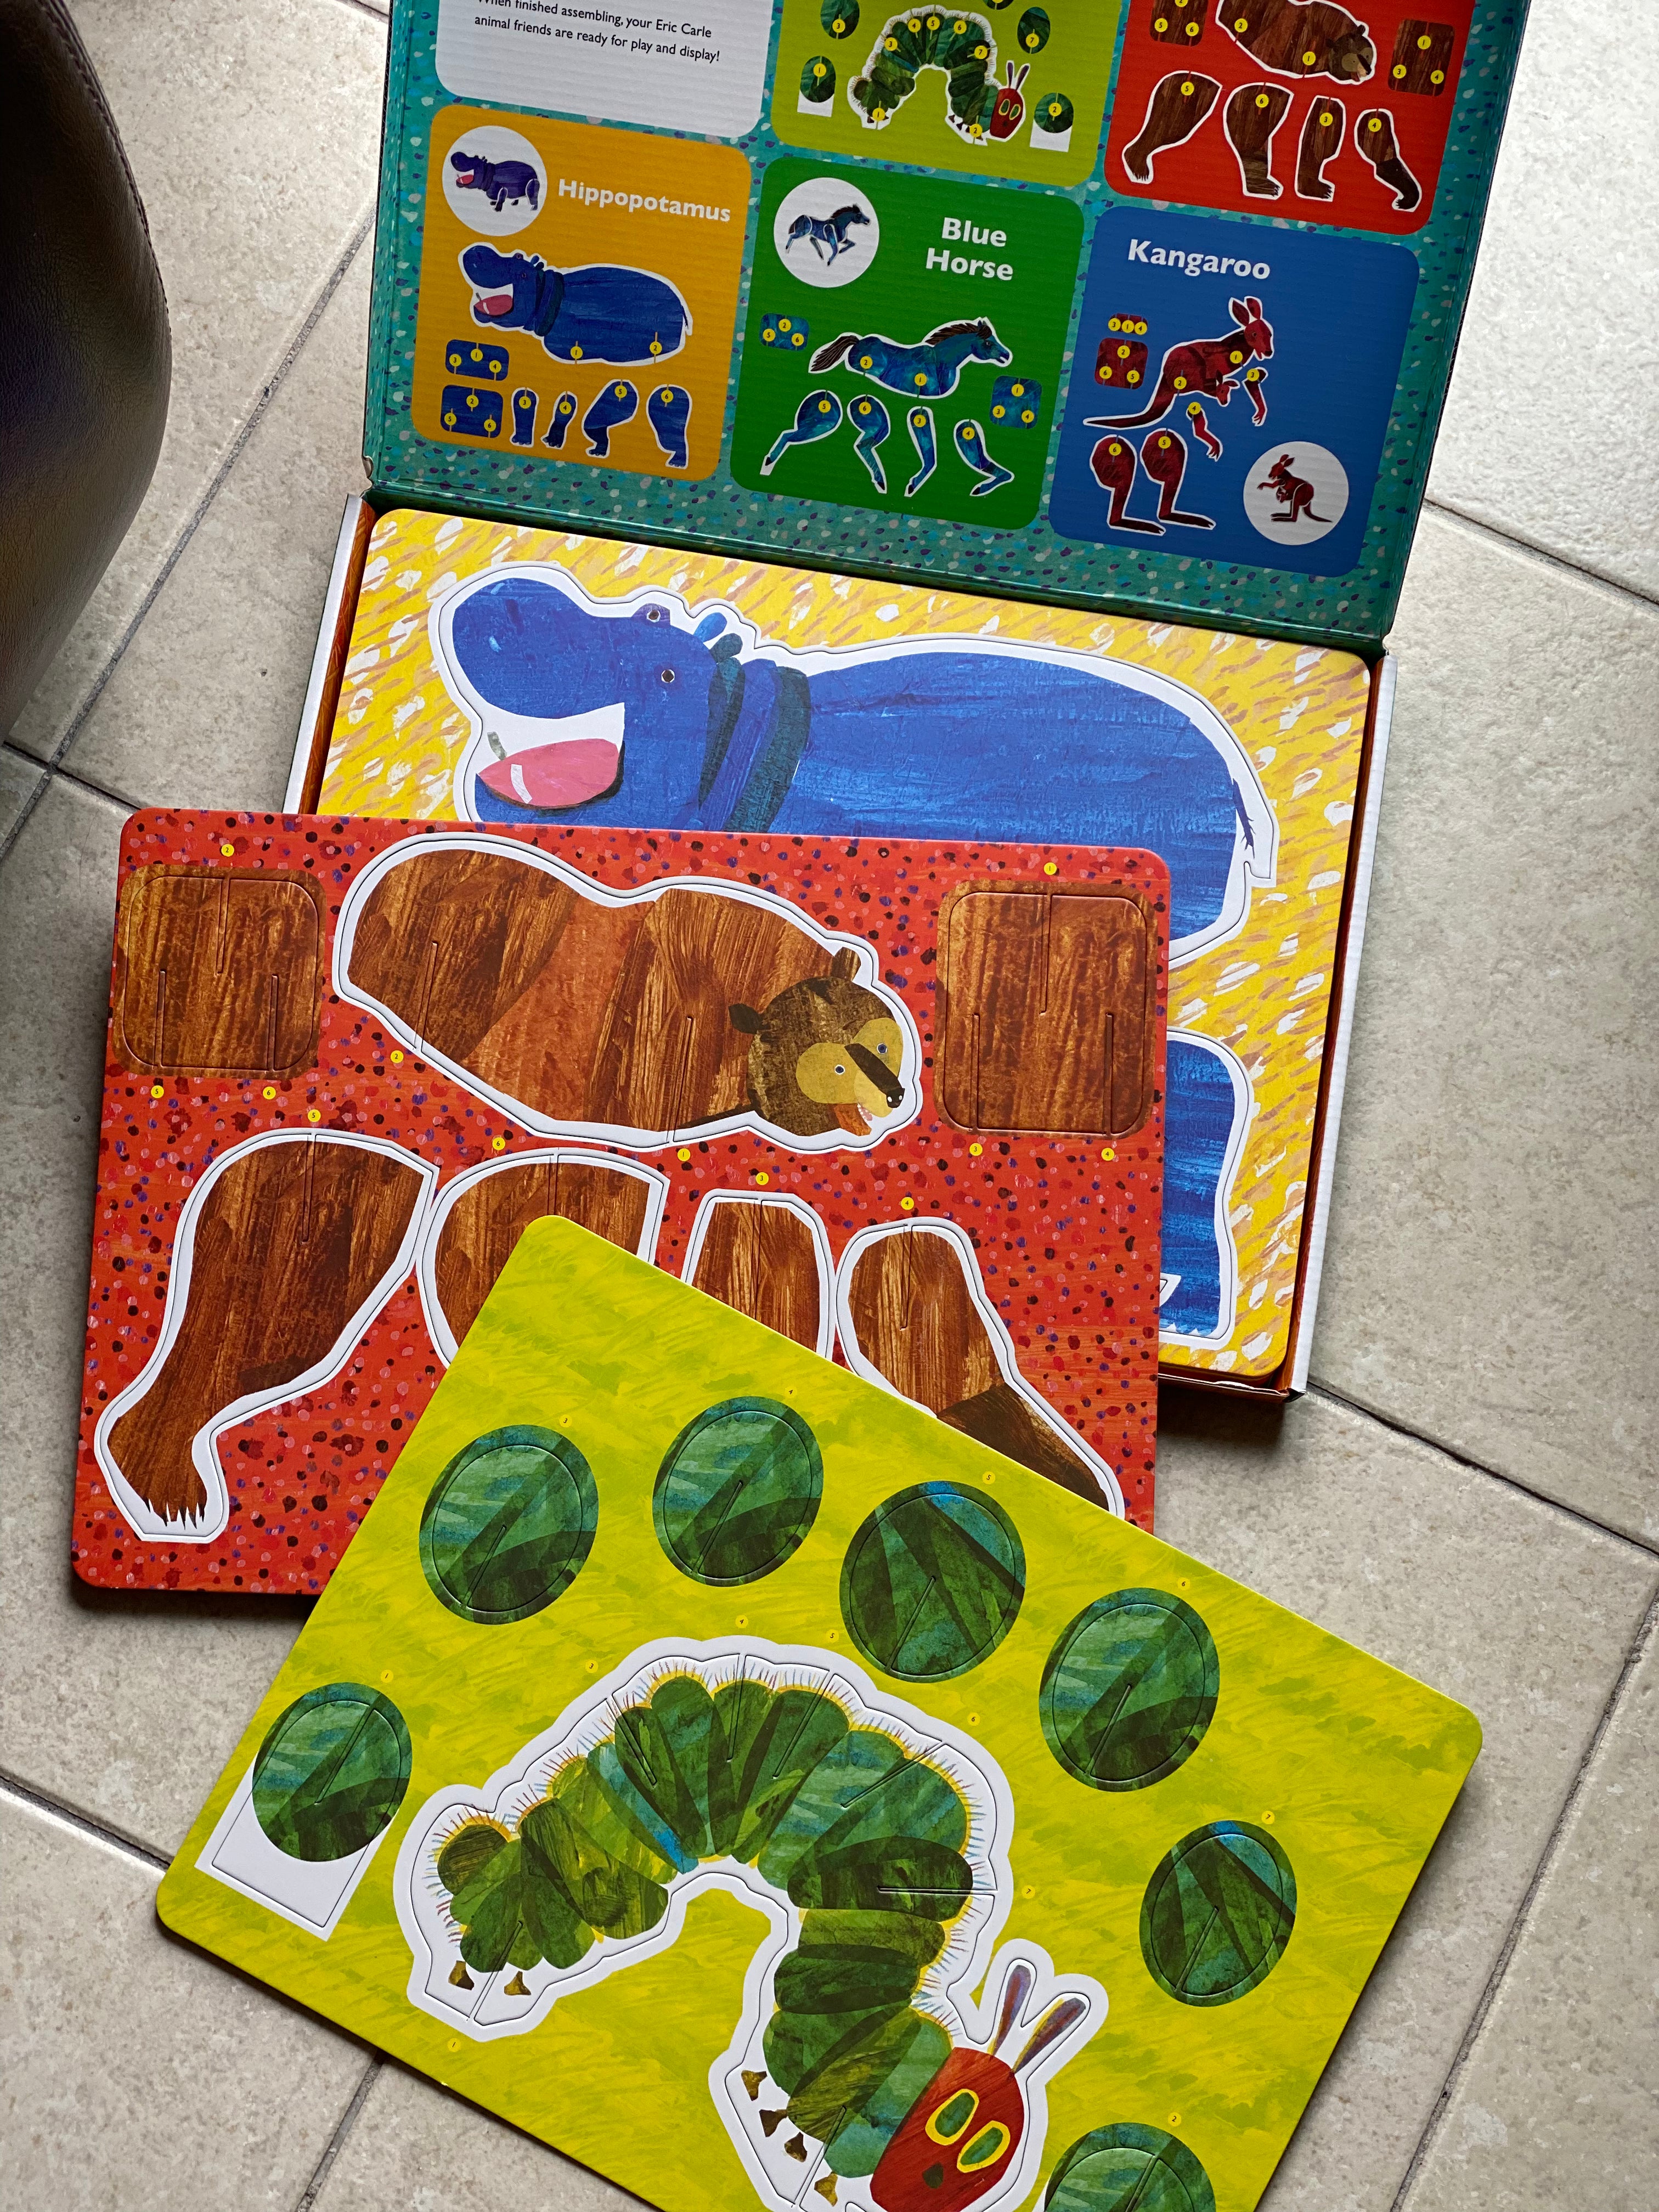 The world of Eric Carle: Punch-out & Play Animals